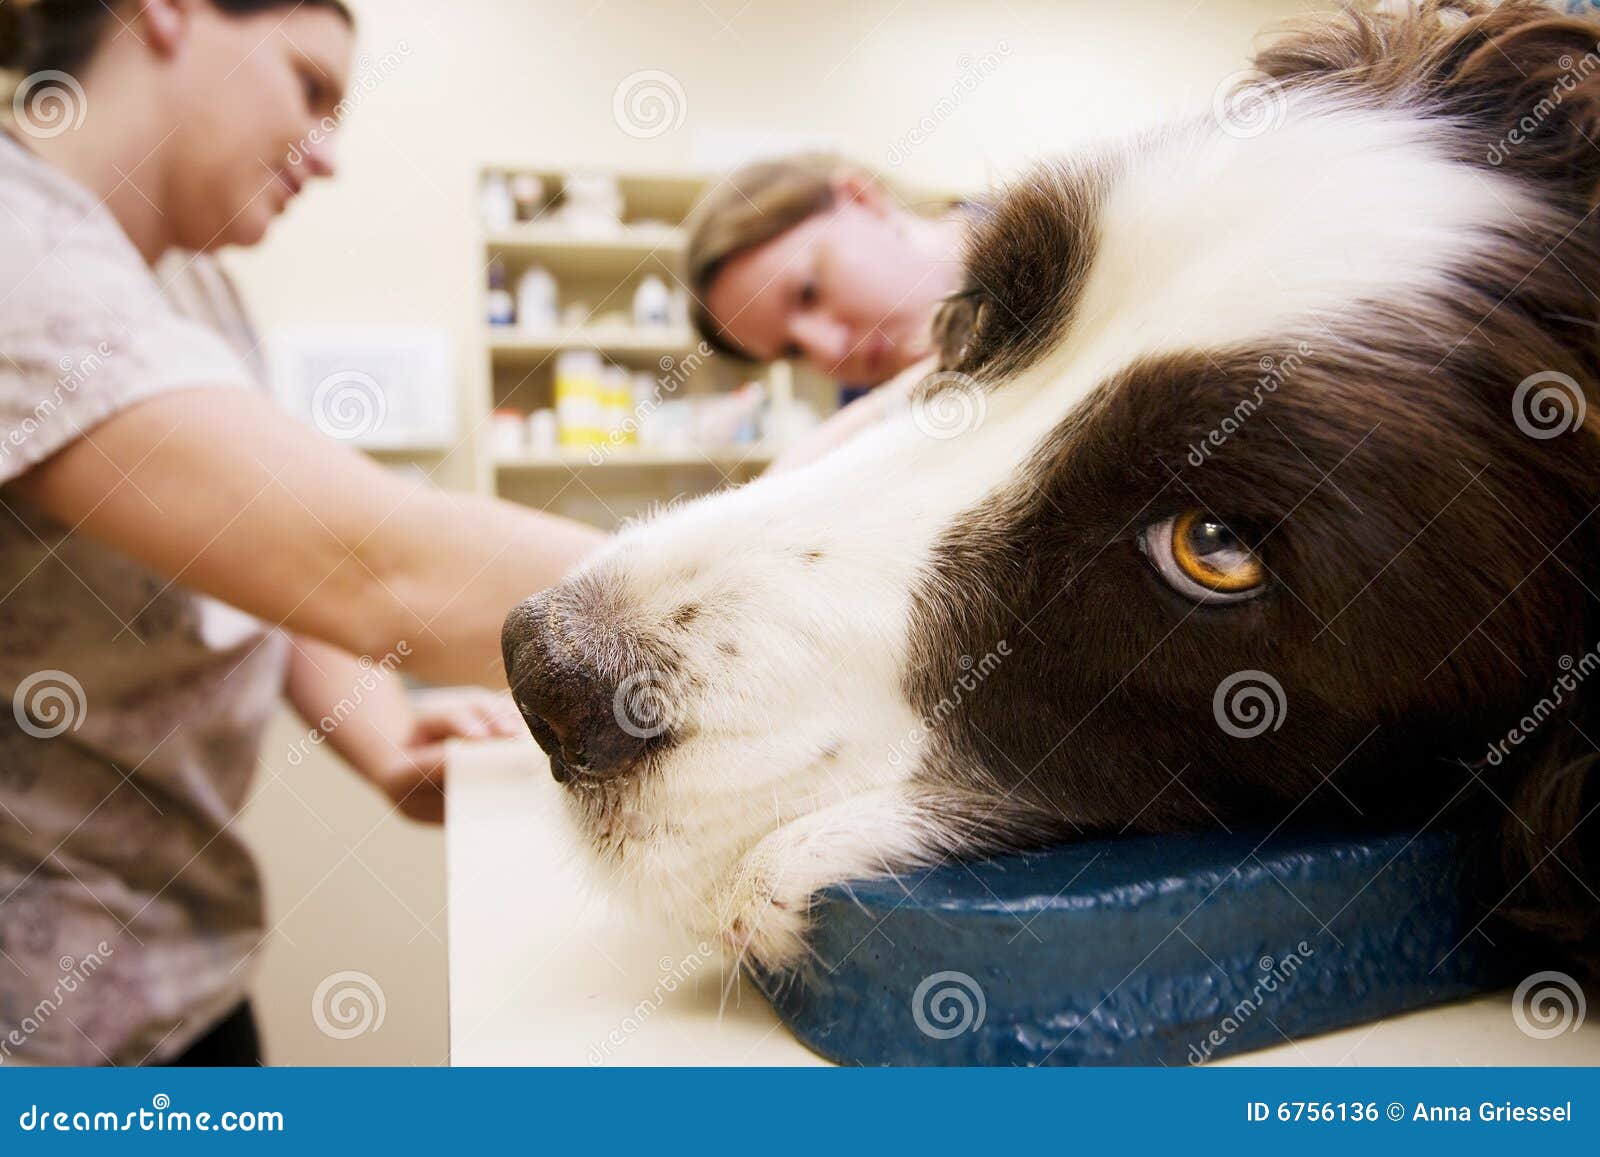 veterinary assistants and dog